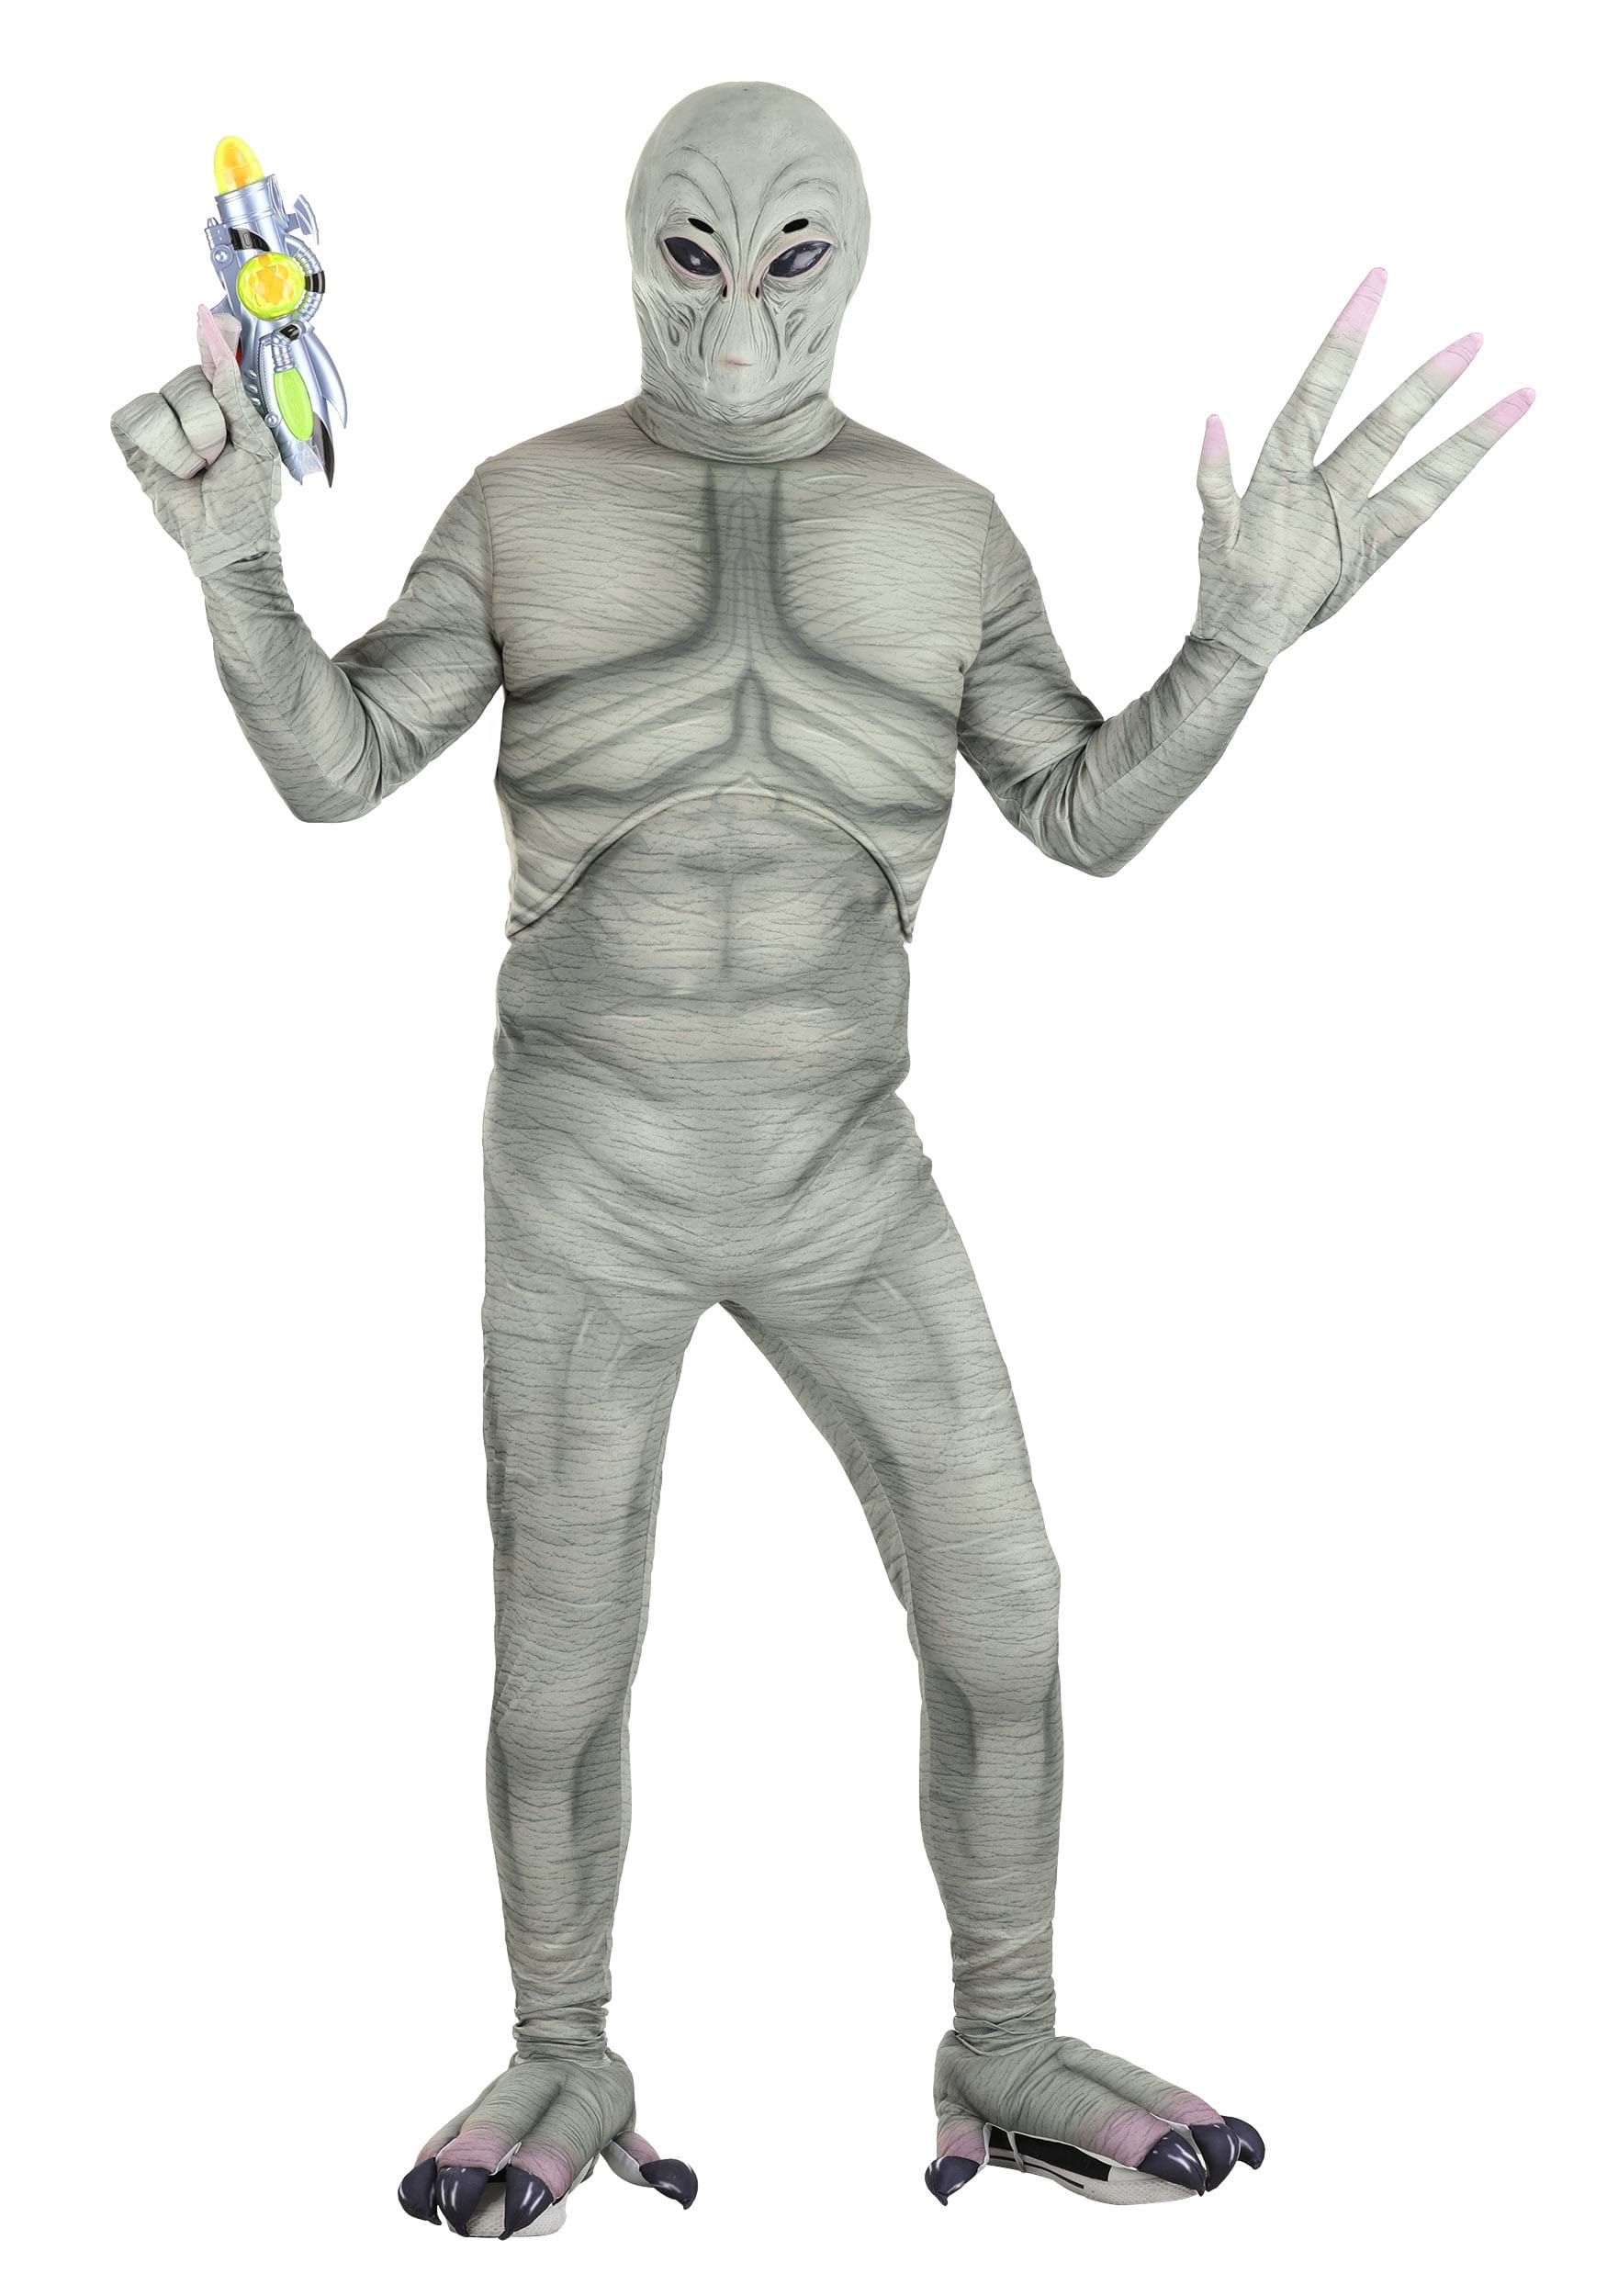 The Rake Morphsuit review